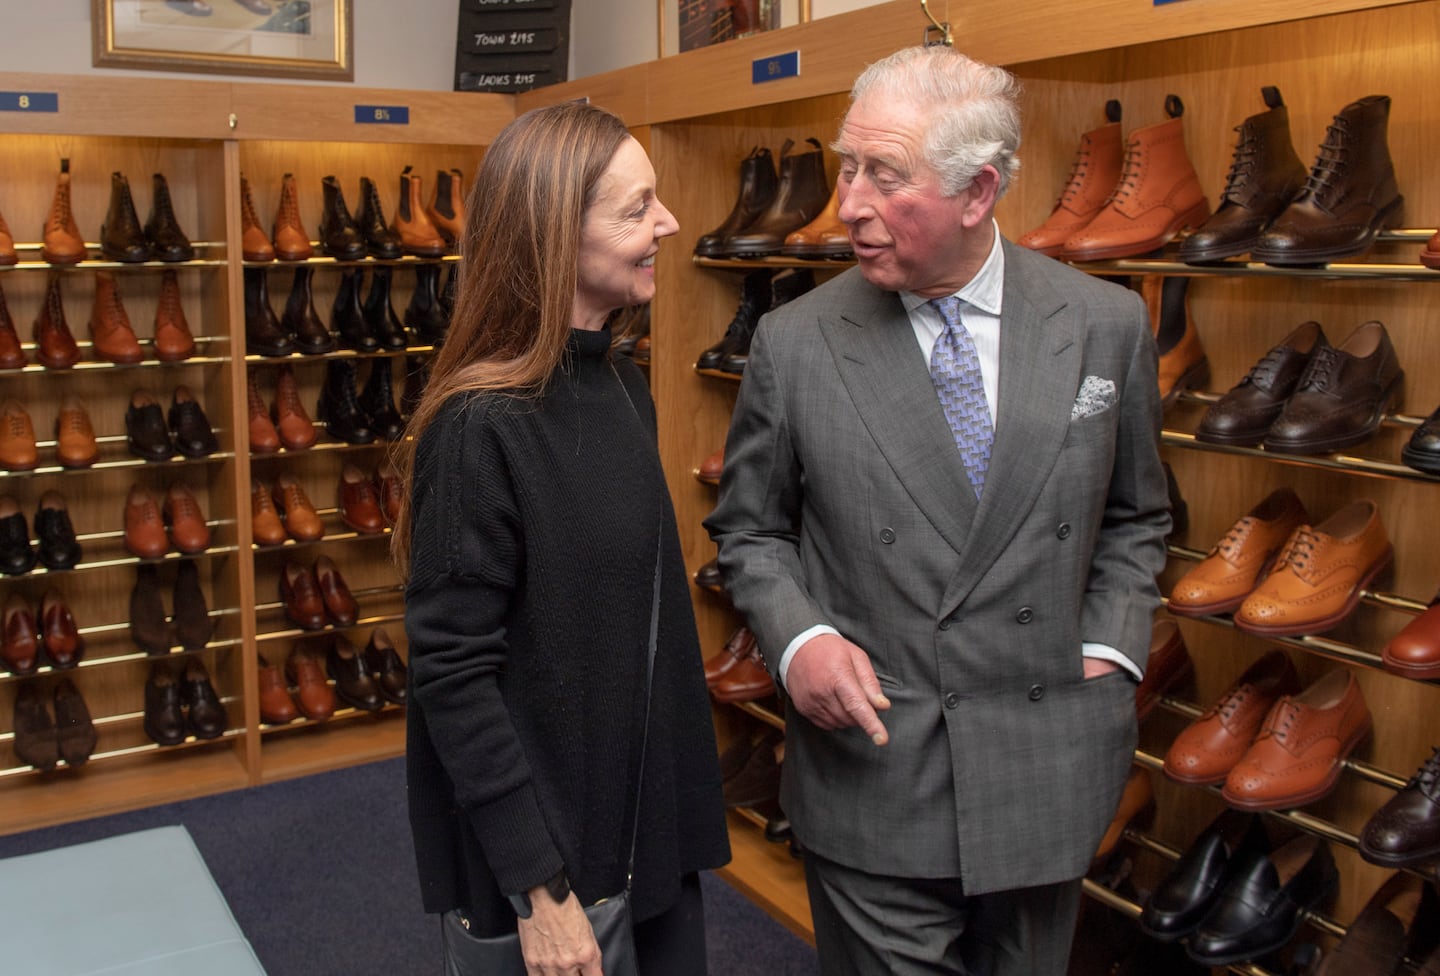 Prince Charles, Prince of Wales visiting shoemaker Tricker's.